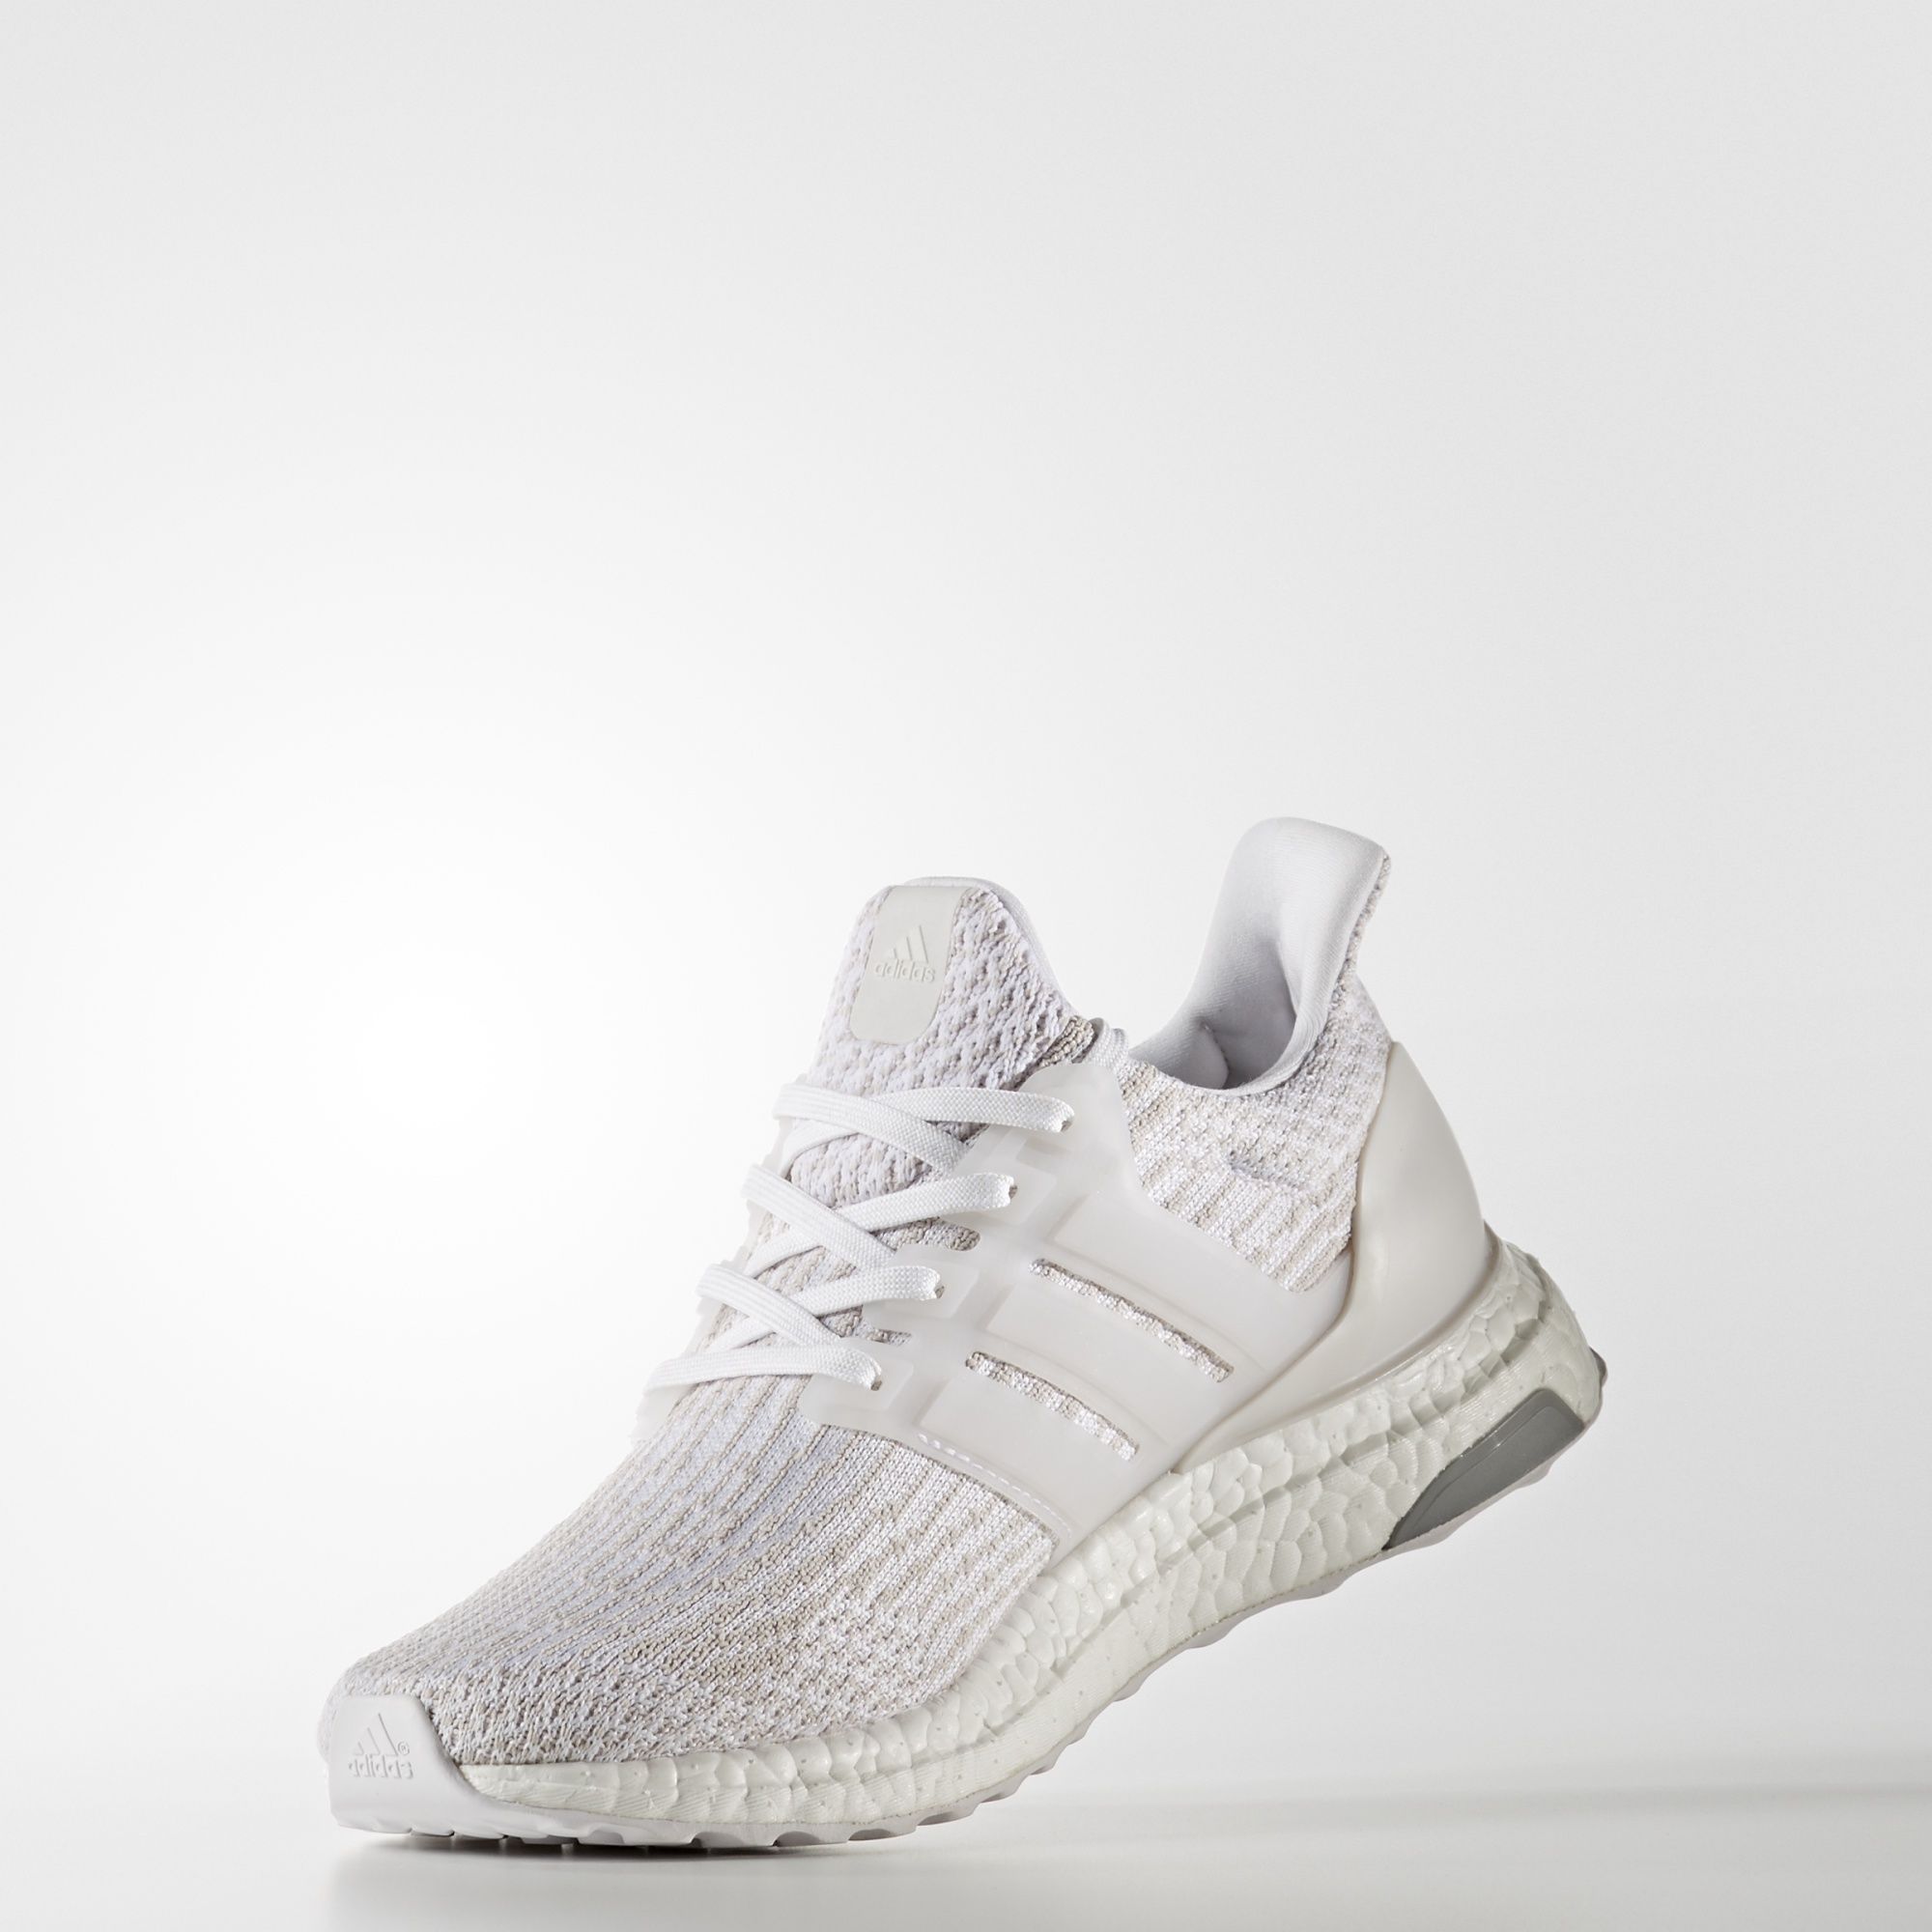 adidas-wmns-ultra-boost-3-0-white-pearl-grey-3